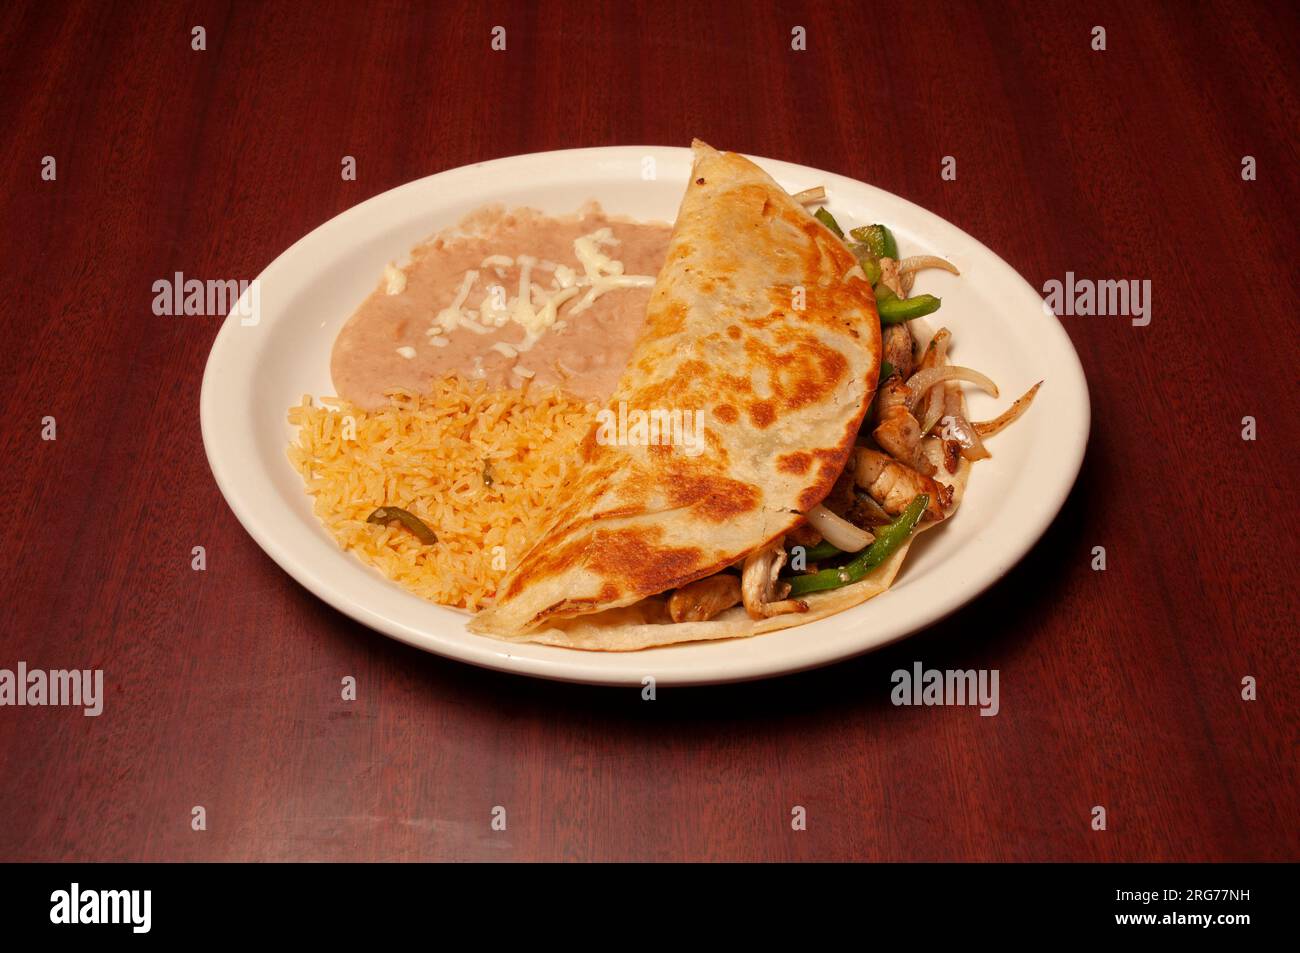 Traditional mexican delicacy known as a steak quesadilla Stock Photo